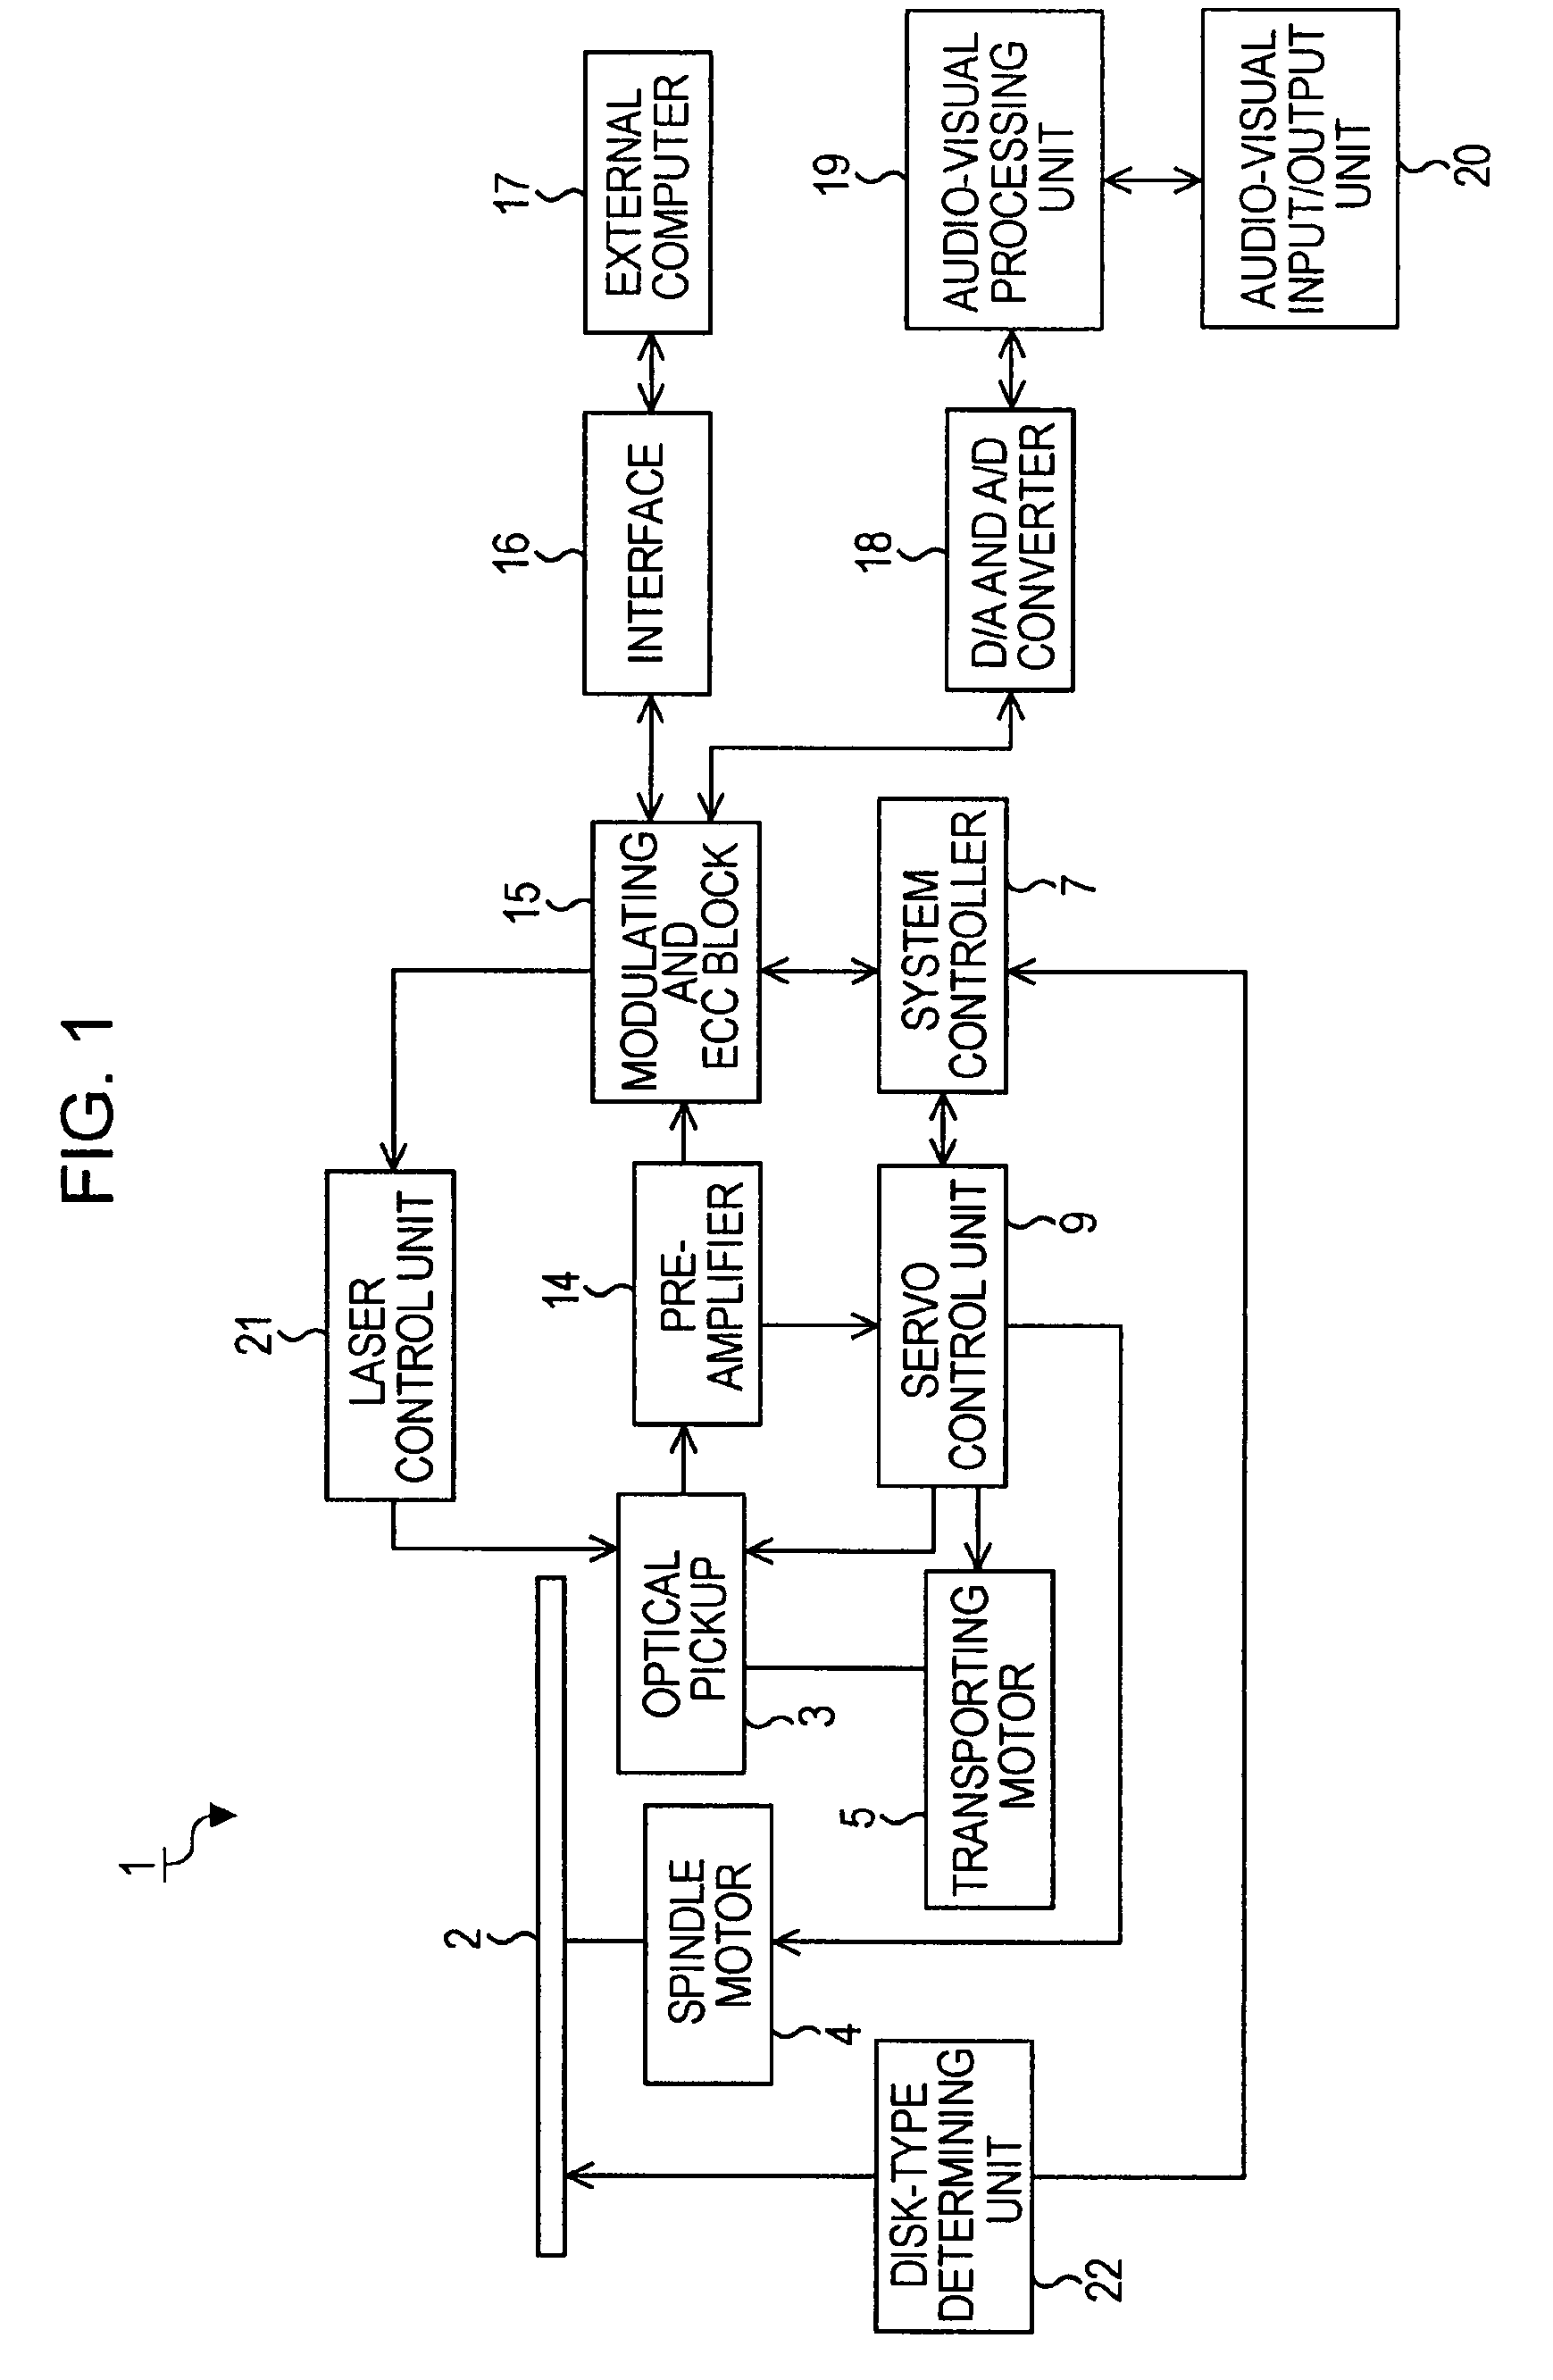 Optical pickup with beam generating and focusing